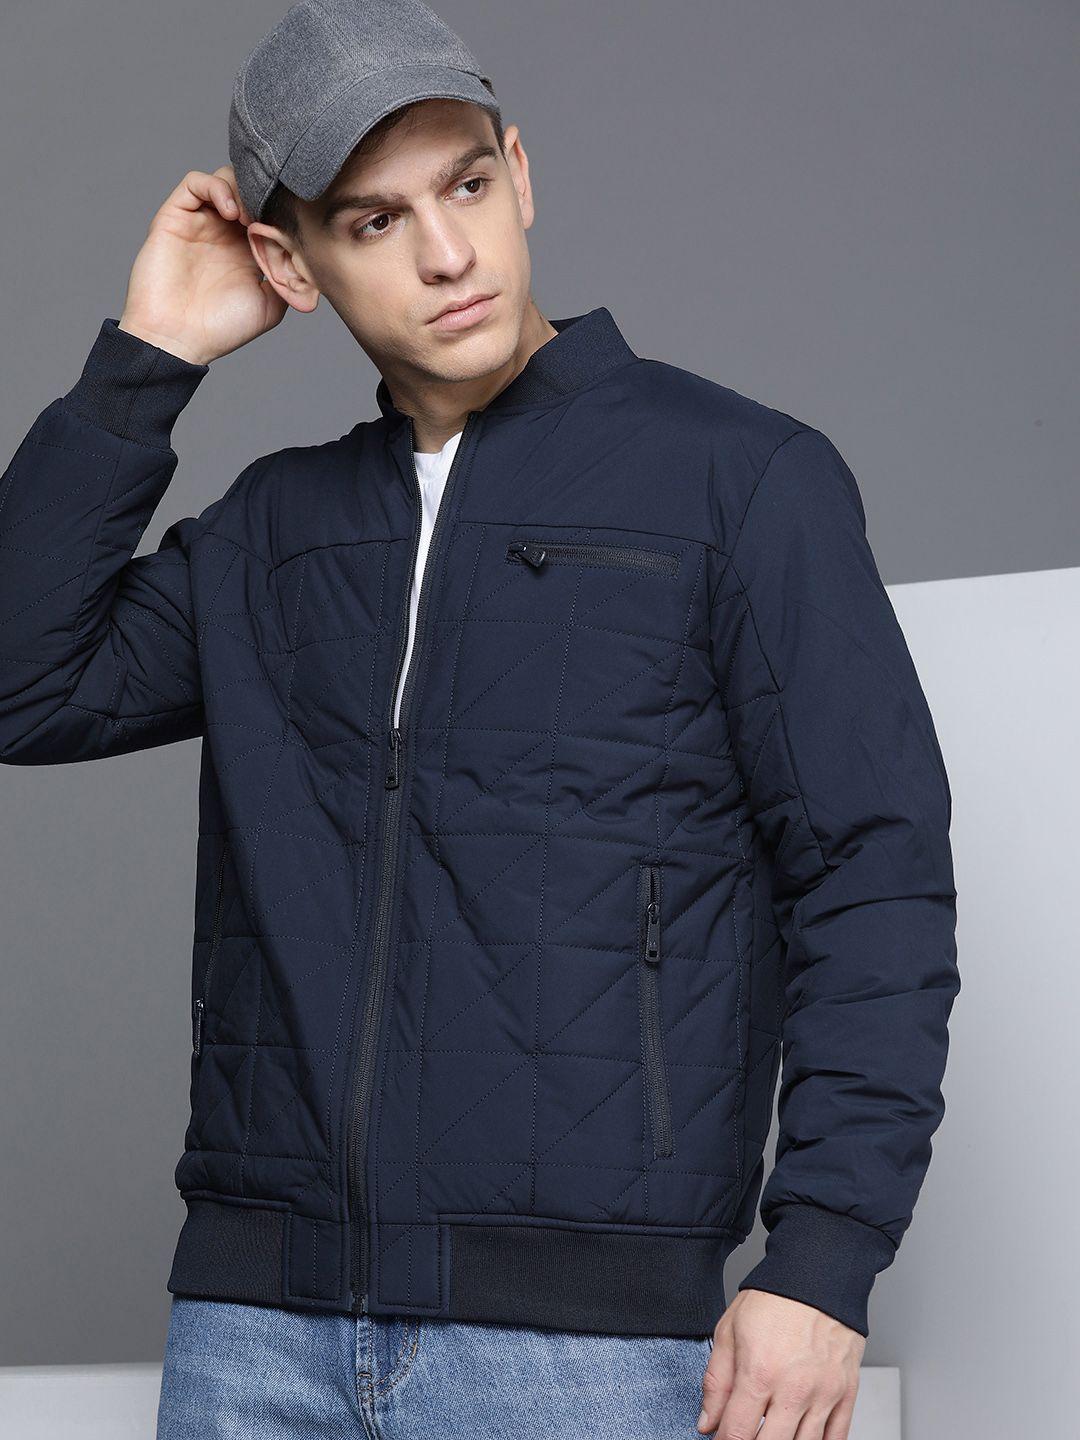 kenneth-cole-velocity-men-navy-blue-self-design-stand-collar-quilted-jacket